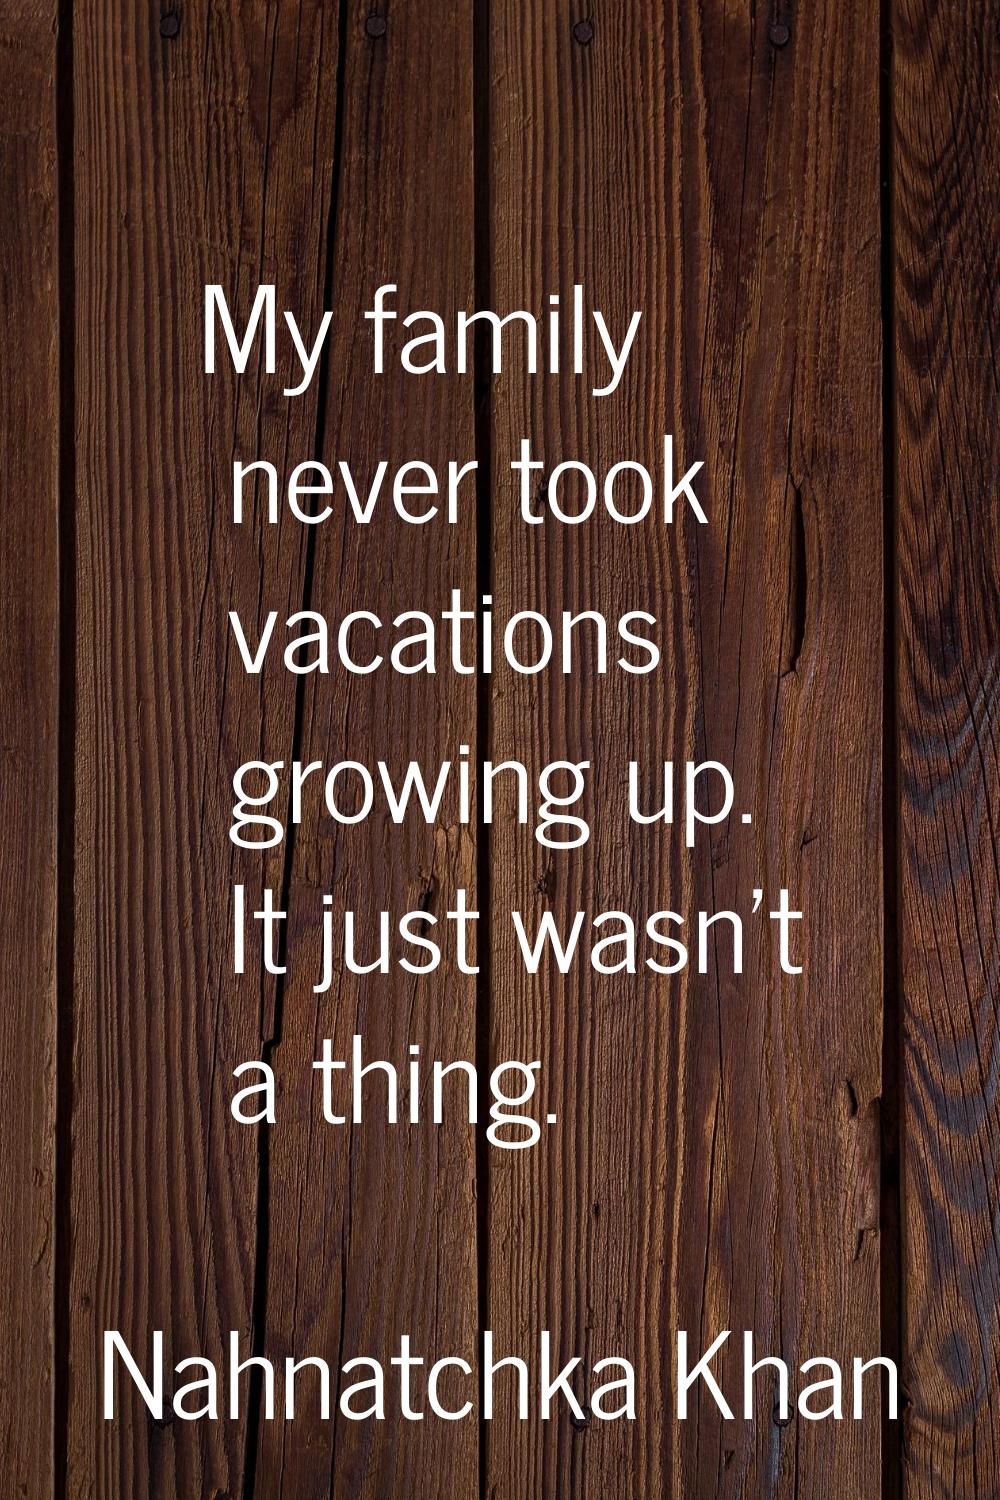 My family never took vacations growing up. It just wasn't a thing.